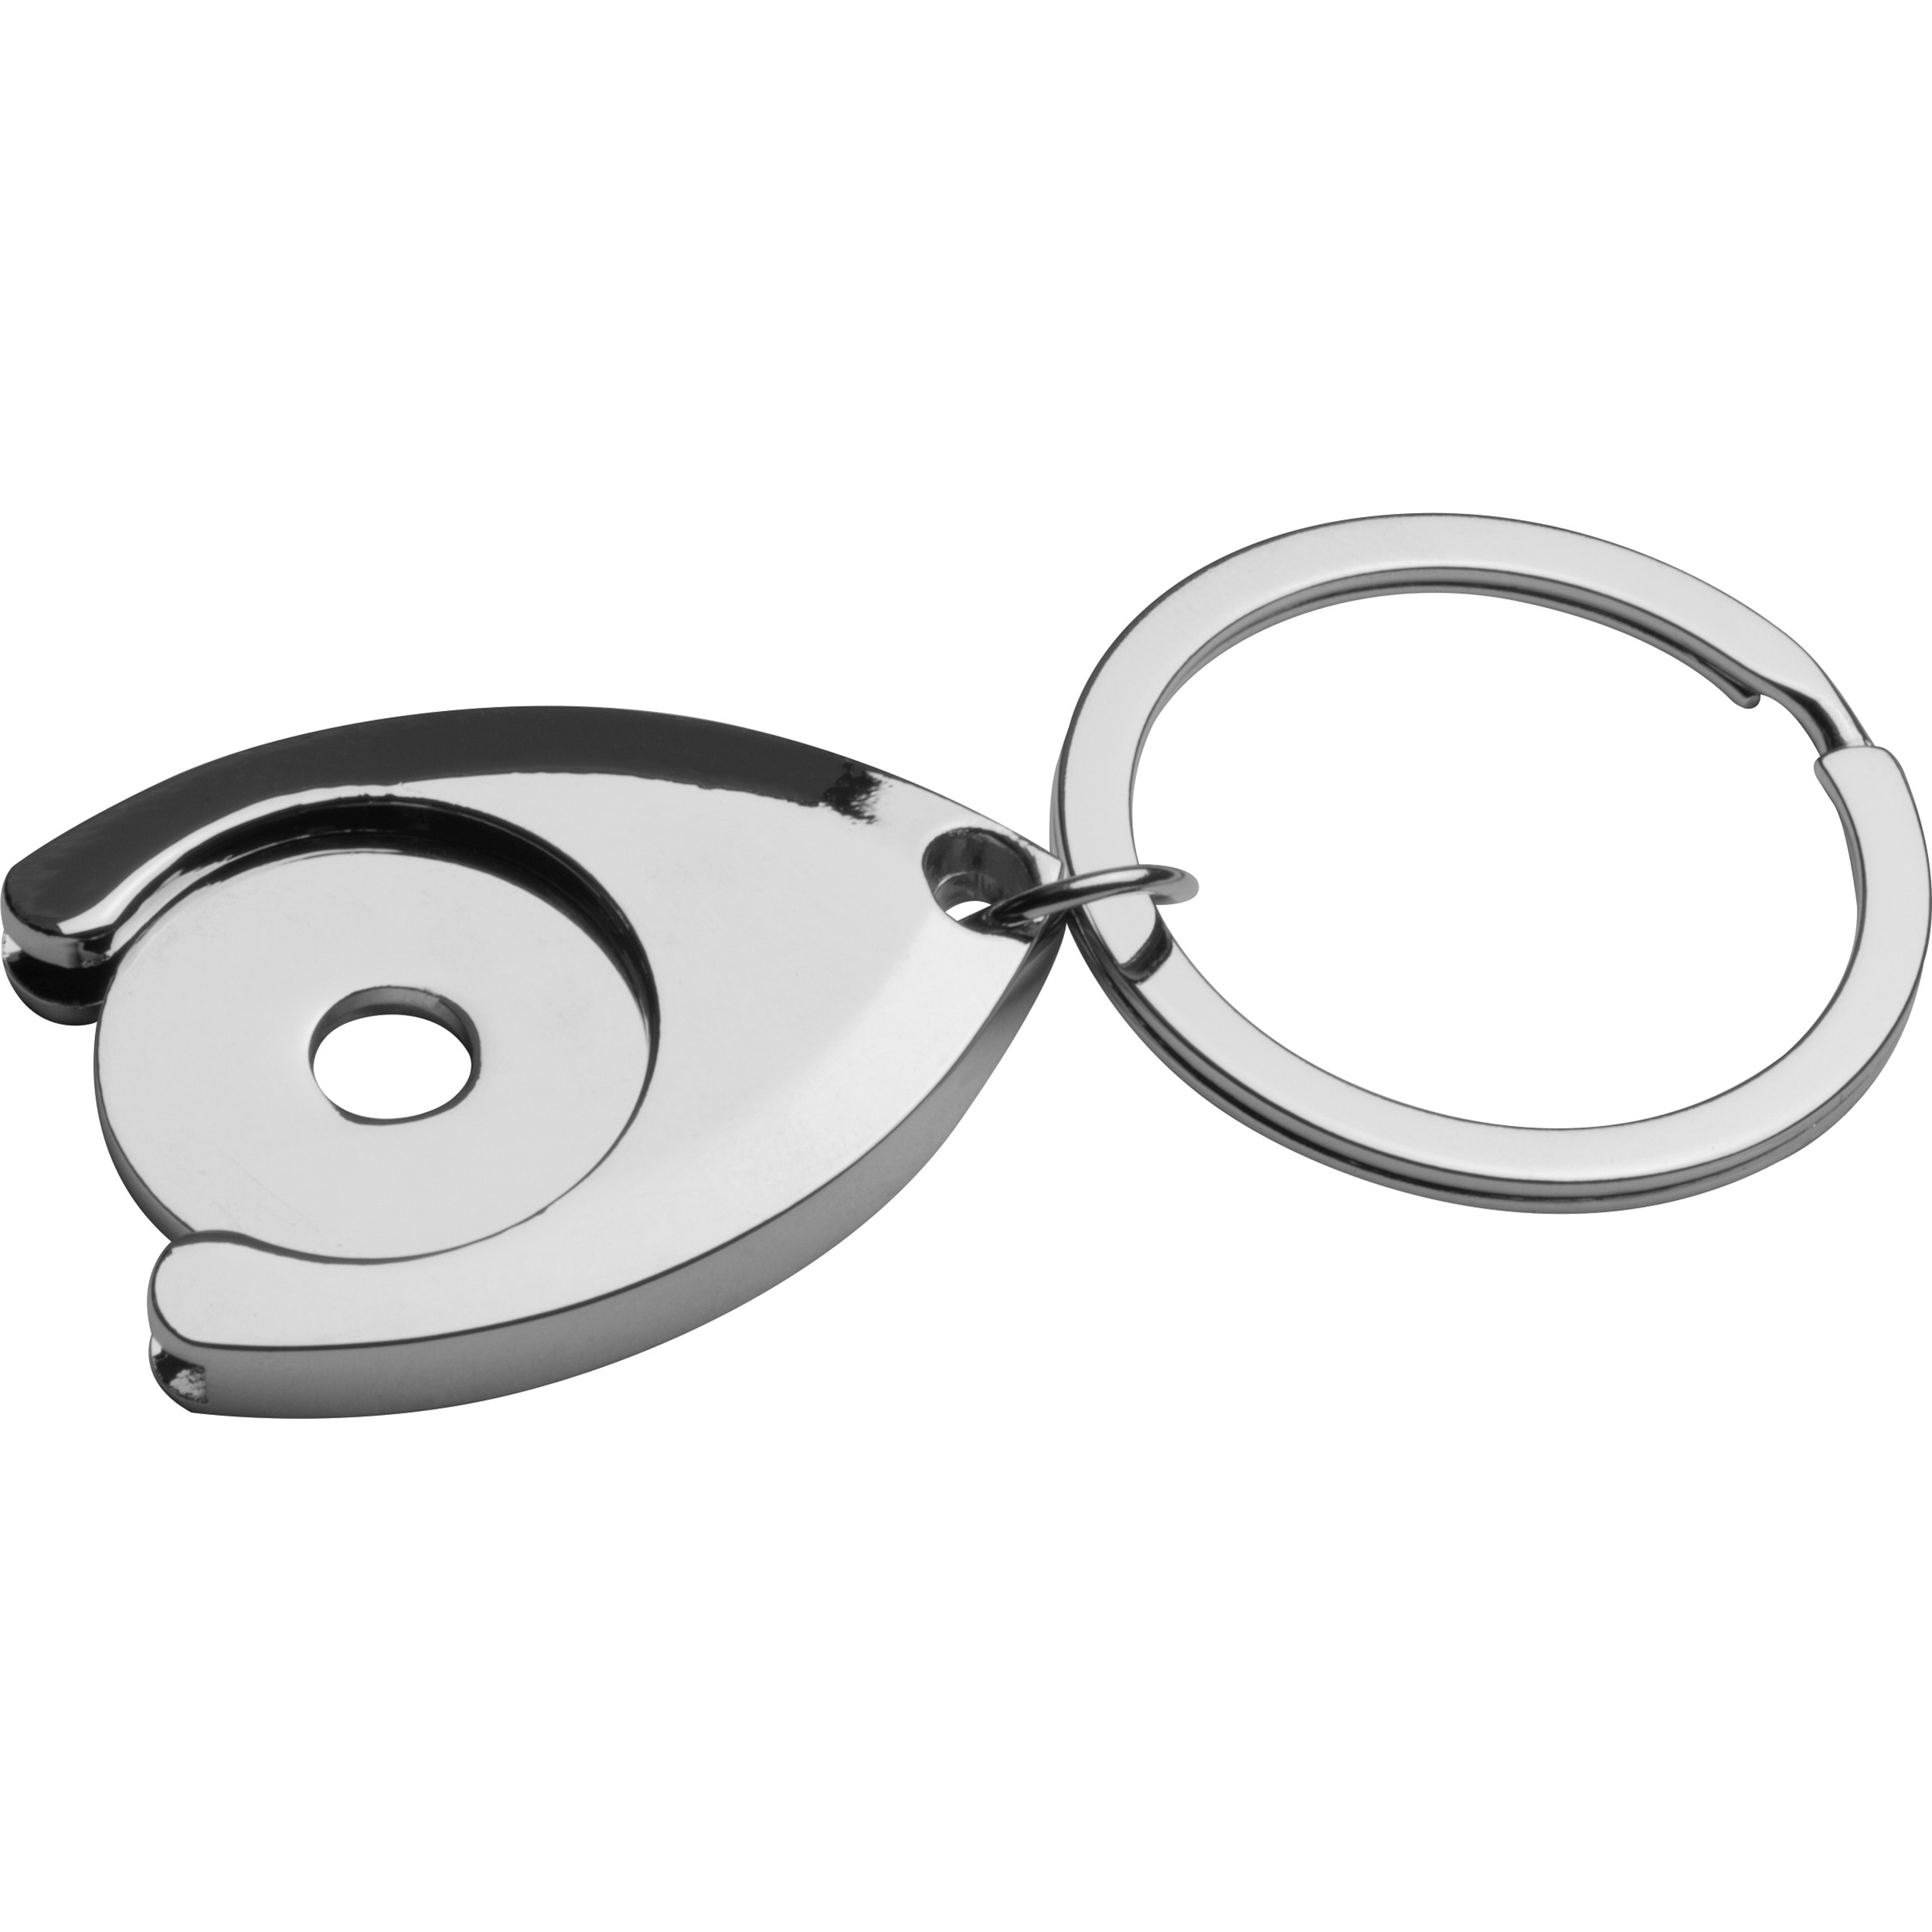 Metal keyring with shopping chip